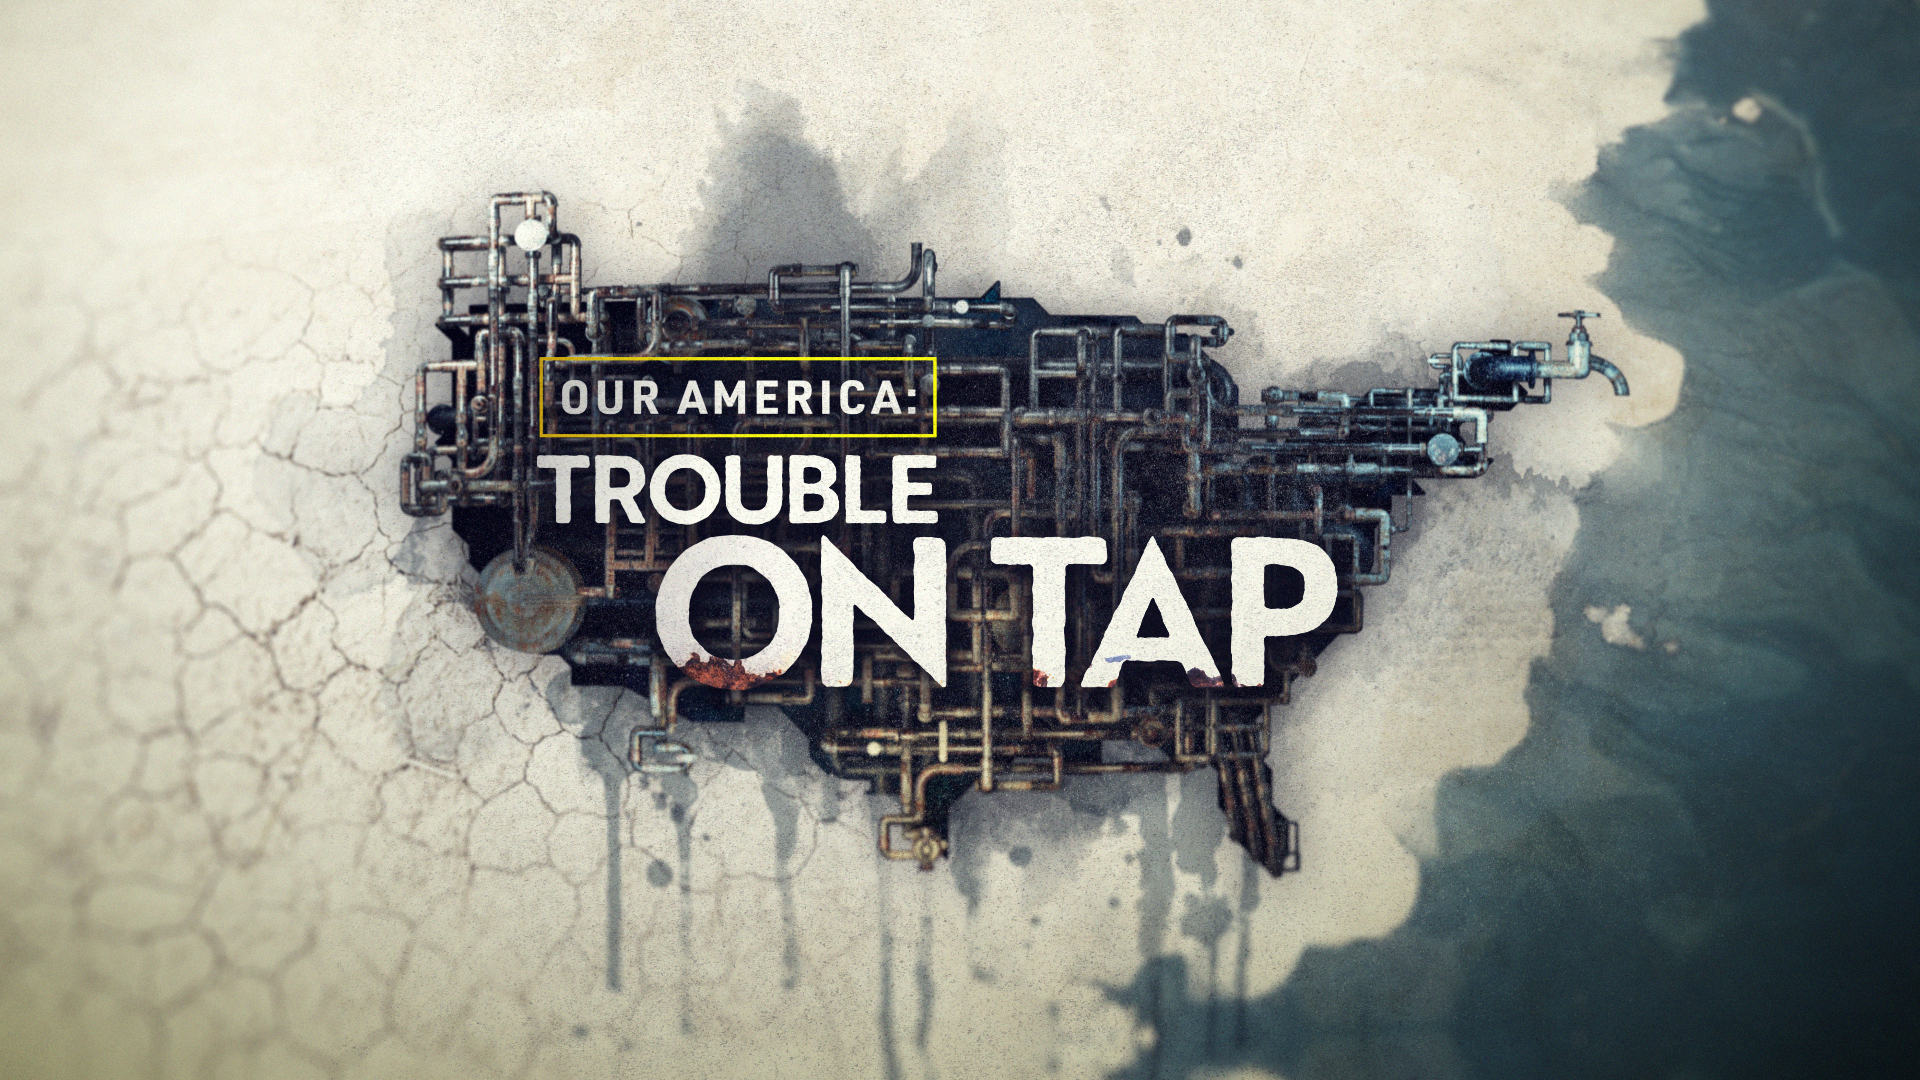 ABC OWNED TELEVISION STATIONS HONOR EARTH MONTH WITH NEW DOCUMENTARY SERIES IN PARTNERSHIP WITH ABC NEWS AND NATIONAL GEOGRAPHIC, ‘OUR AMERICA: TROUBLE ON TAP’